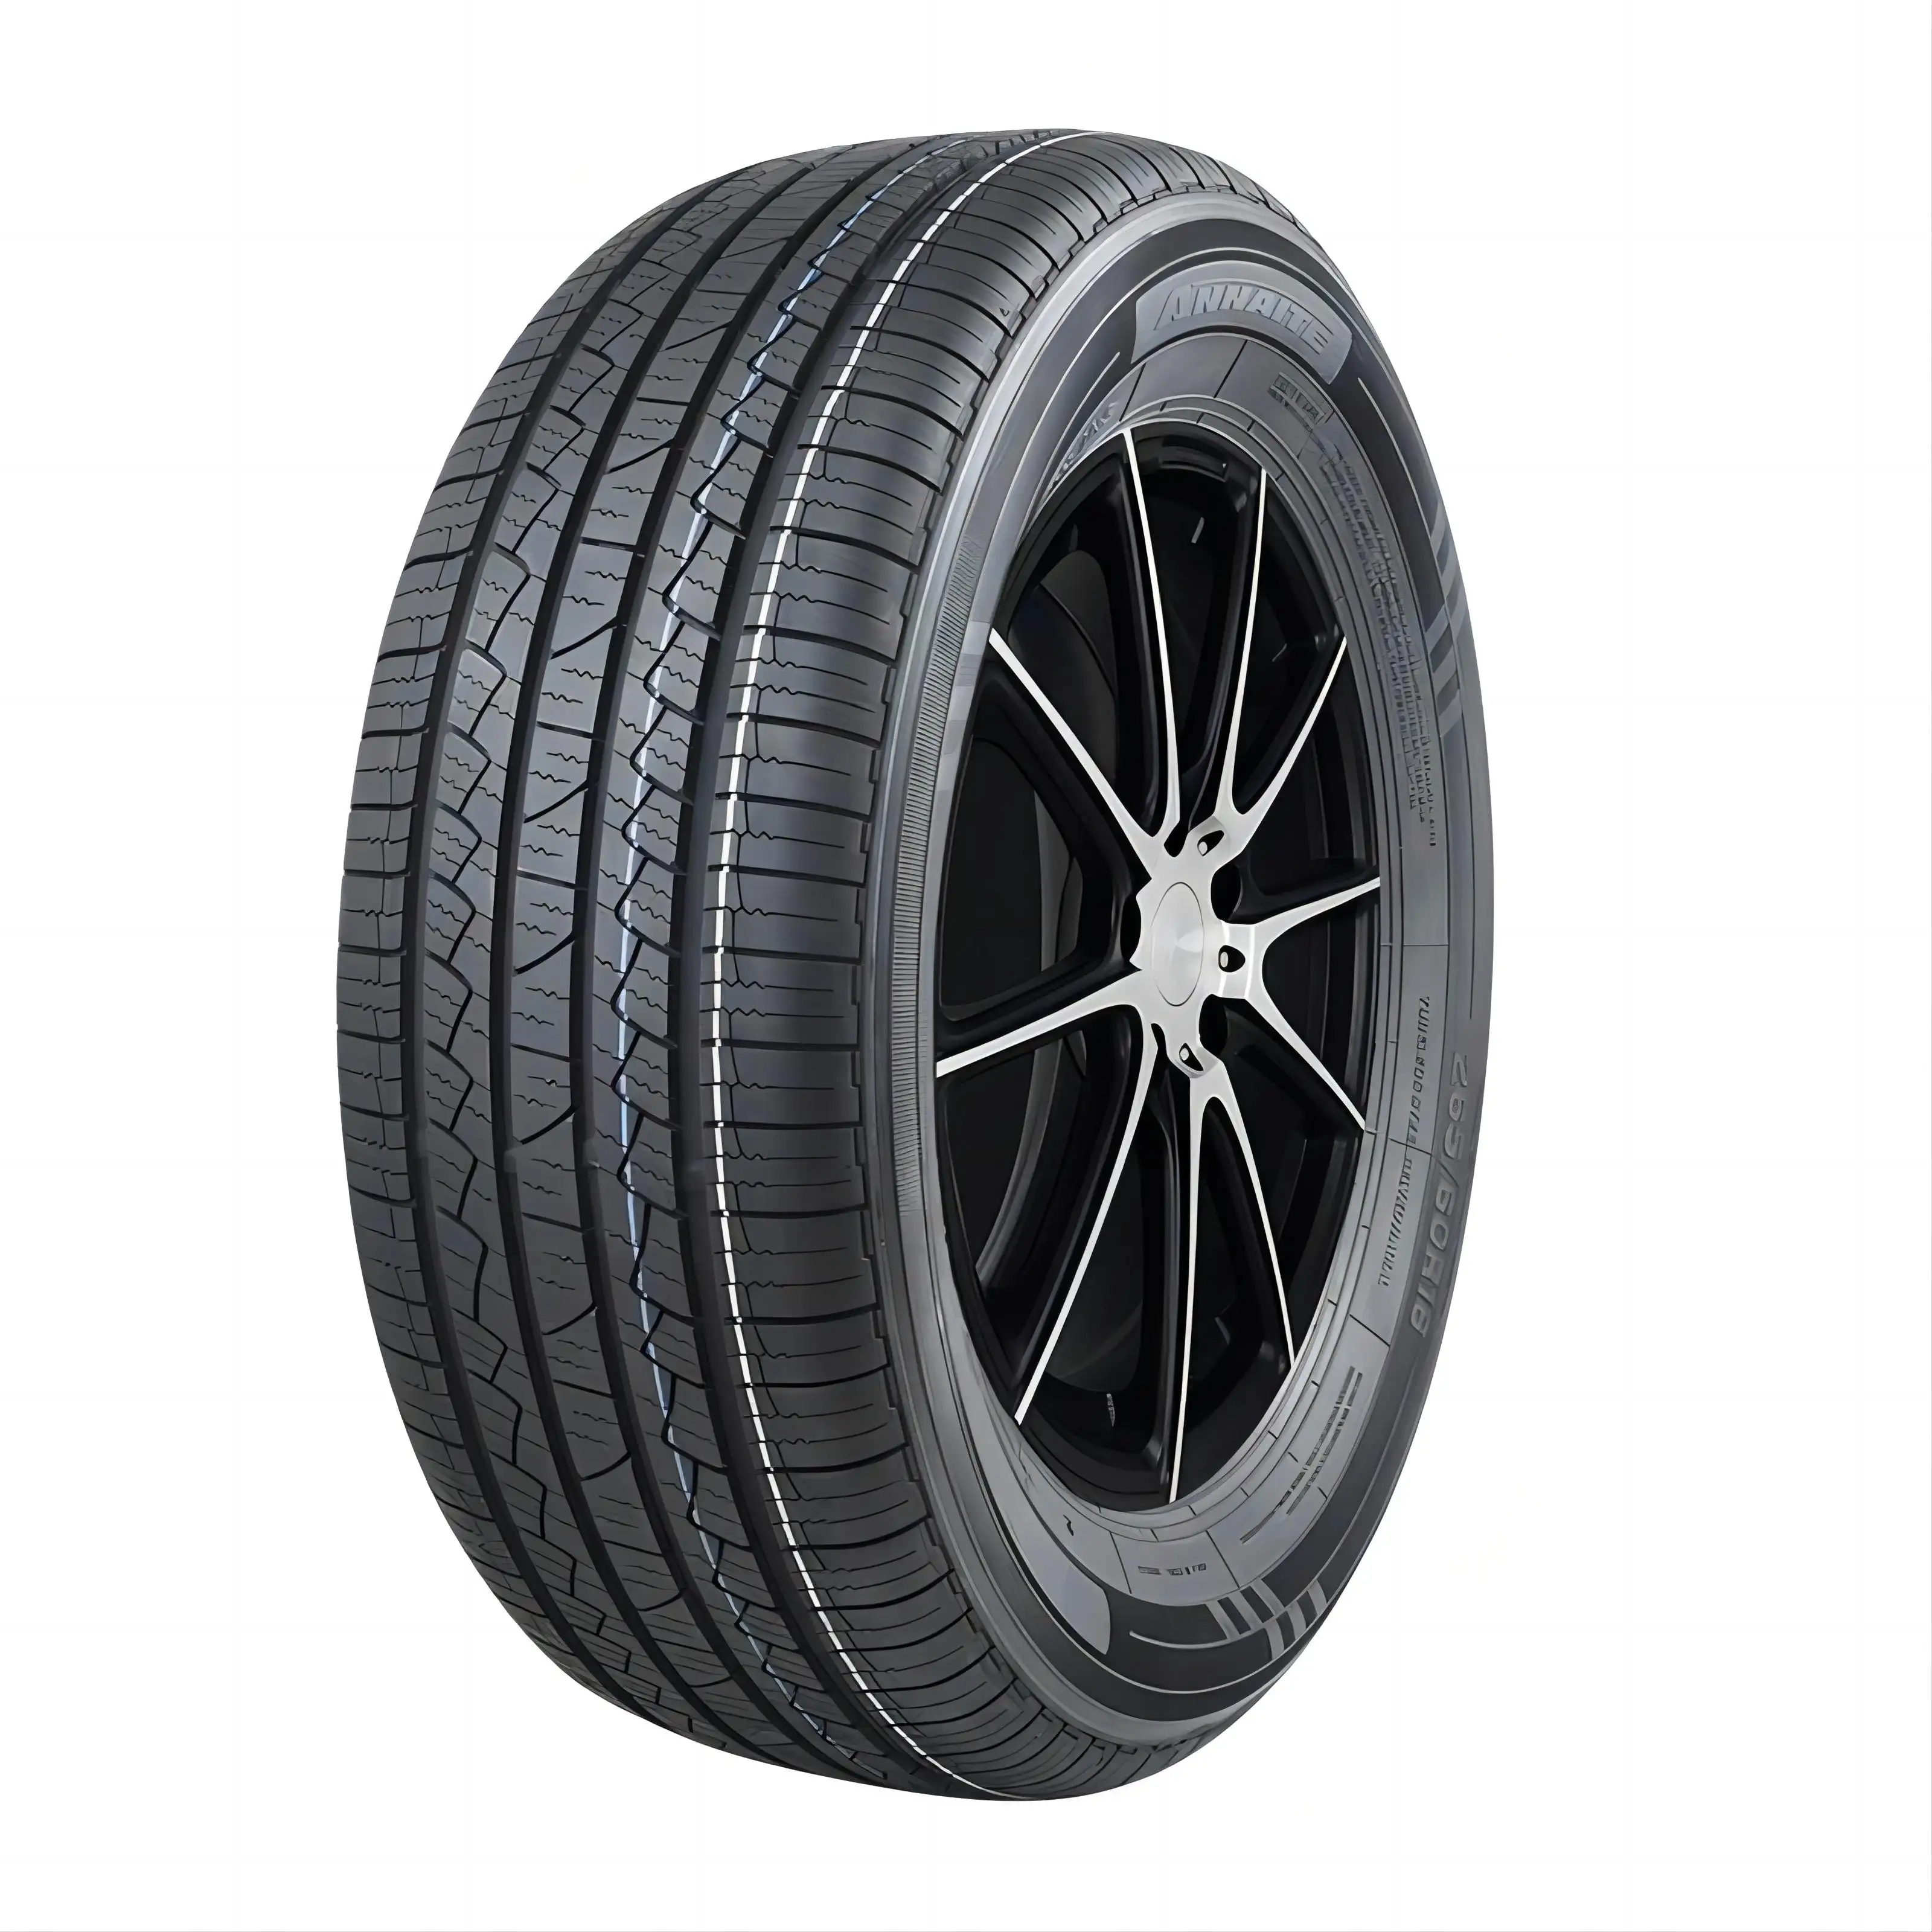 R20 low price premium passenger car tires 275 60r20 china factory tire 285 45/20 285 50r20 discount tires for cars